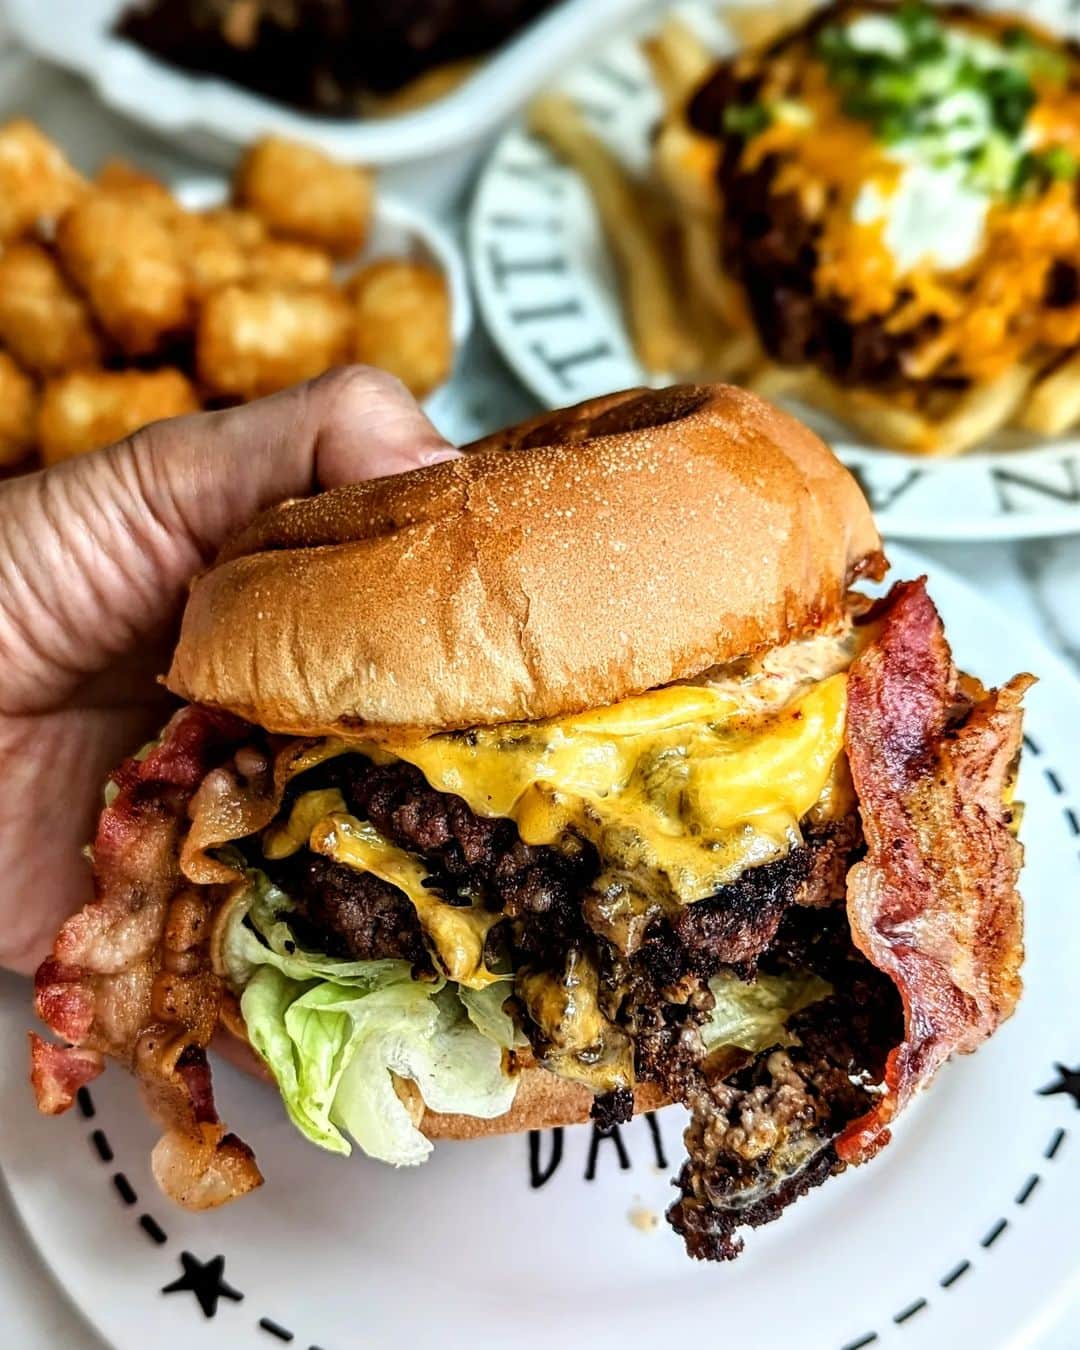 Li Tian の雑貨屋のインスタグラム：「15% OFF your orders with code "TAKE15"  Only when u order via @honbo.burger online delivery platform @oddleeats    Choose from the signature burgers Golden Standard, the Scallop, chilli fries, tater tots and many more! They tasted as good as when I had them in store. This is truly a great chance to order online and enjoy them at home!   Hurry! limited time only!   #sgfood #sgfoodie #burgers」